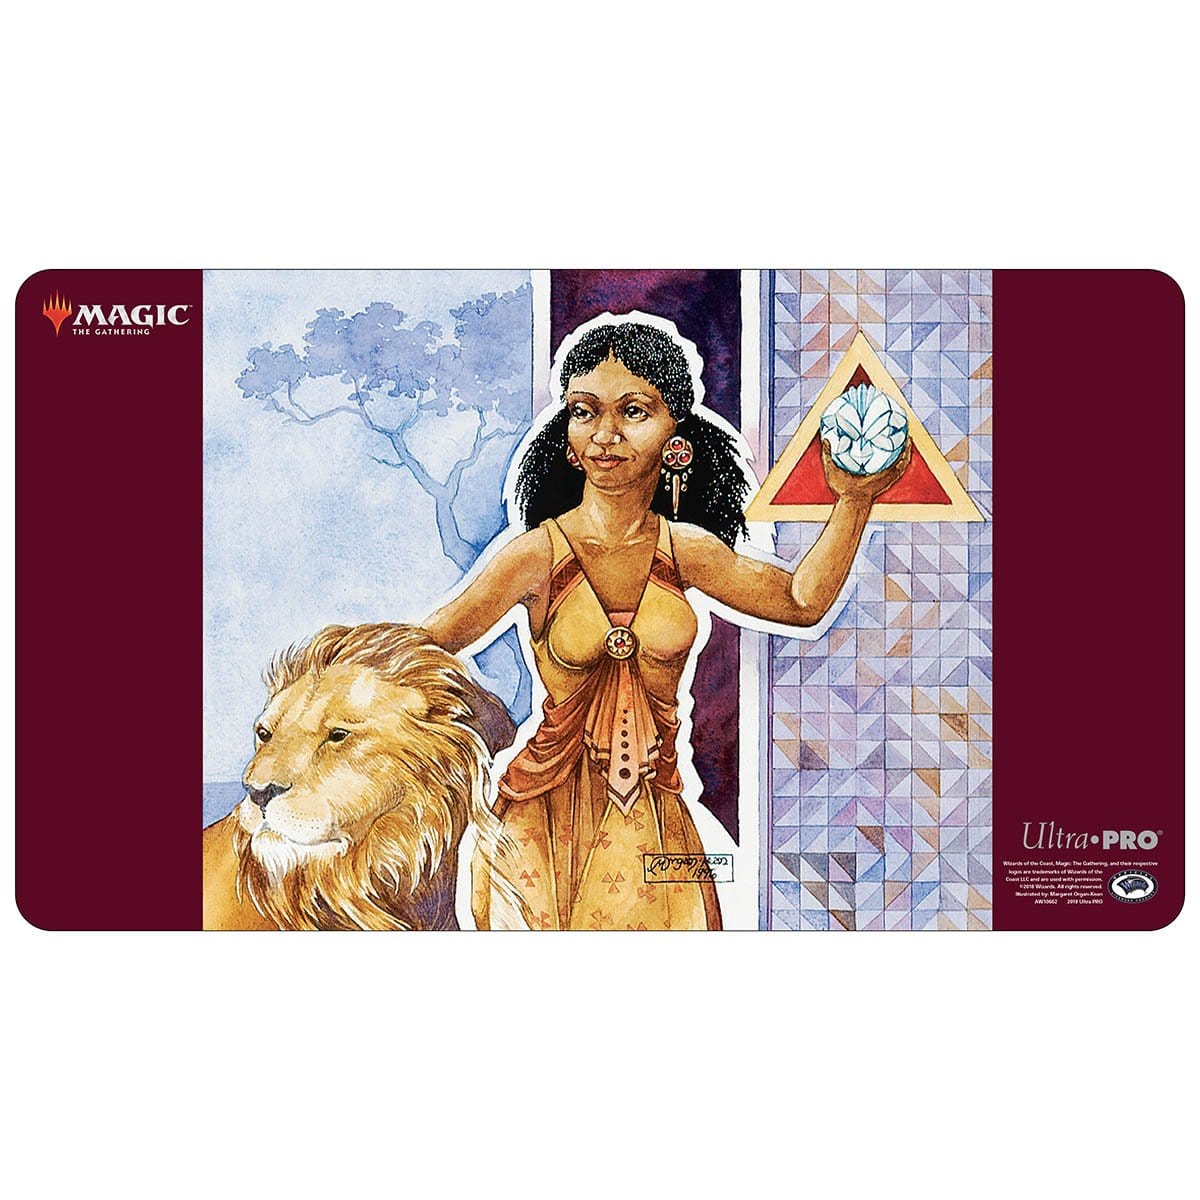 Lion's Eye Diamond Playmat - Playmat - Original Magic Art - Accessories for Magic the Gathering and other card games